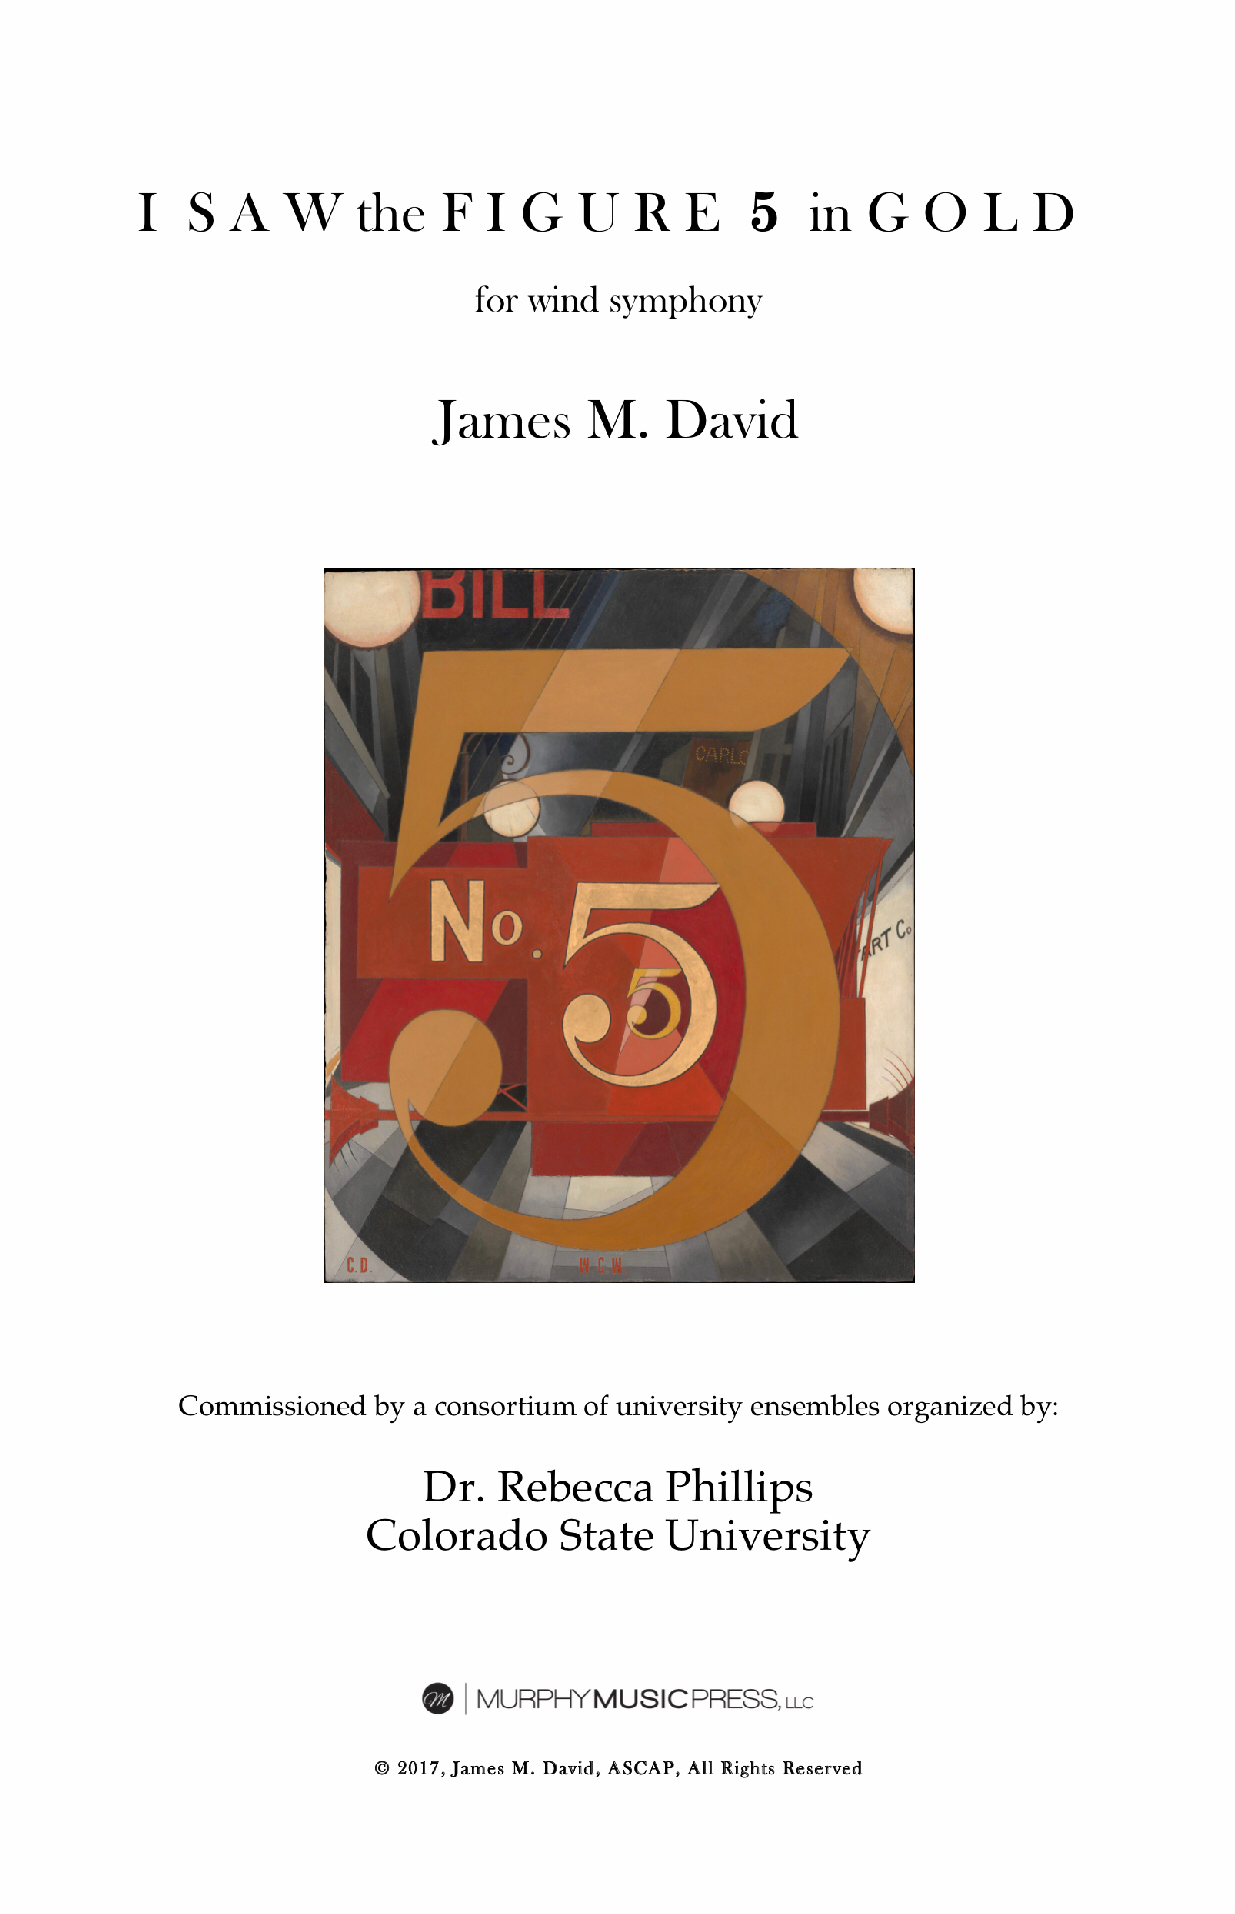 I Saw The Figure 5 In Gold (Score Only) by James David